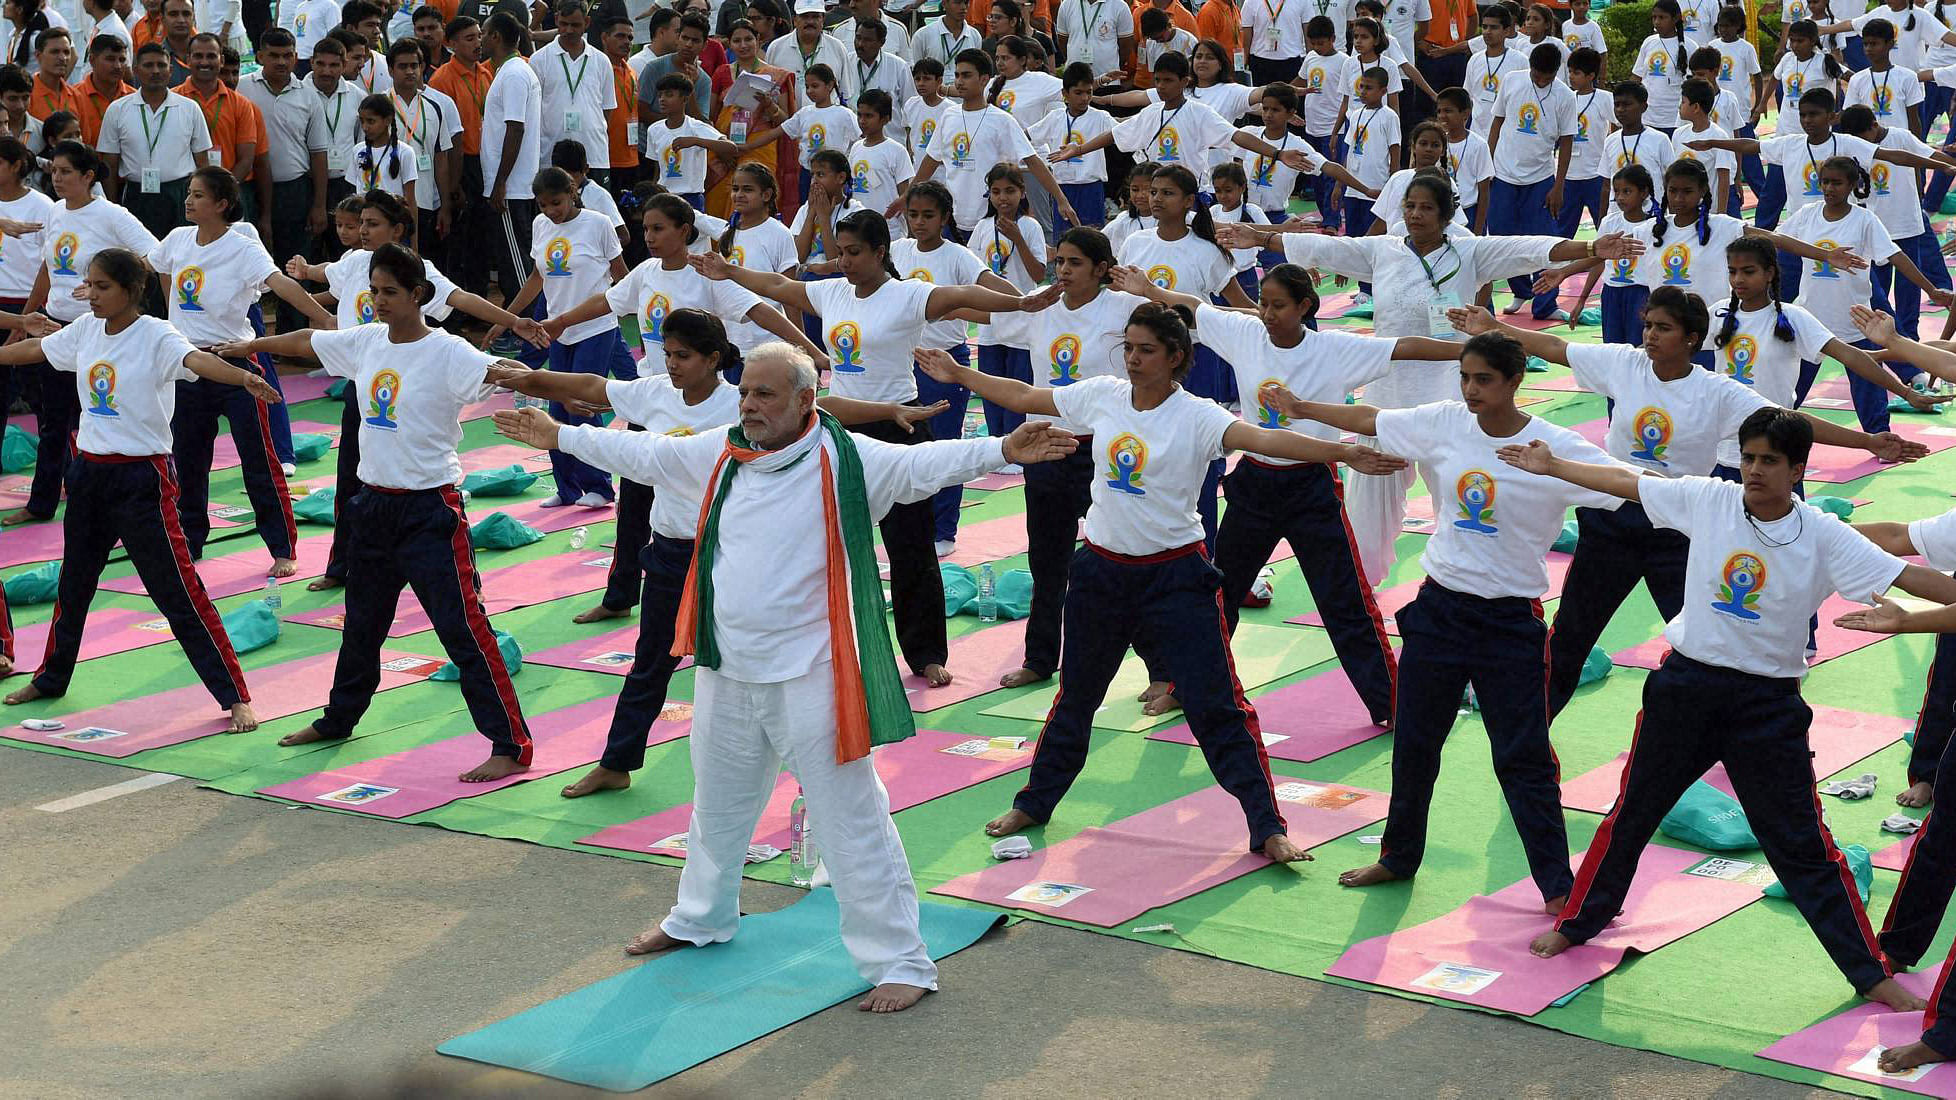 Prime Minister Narendra Modi performs yoga along with thousands of others at a mass yoga session to mark the International Day of Yoga 2015.&nbsp;